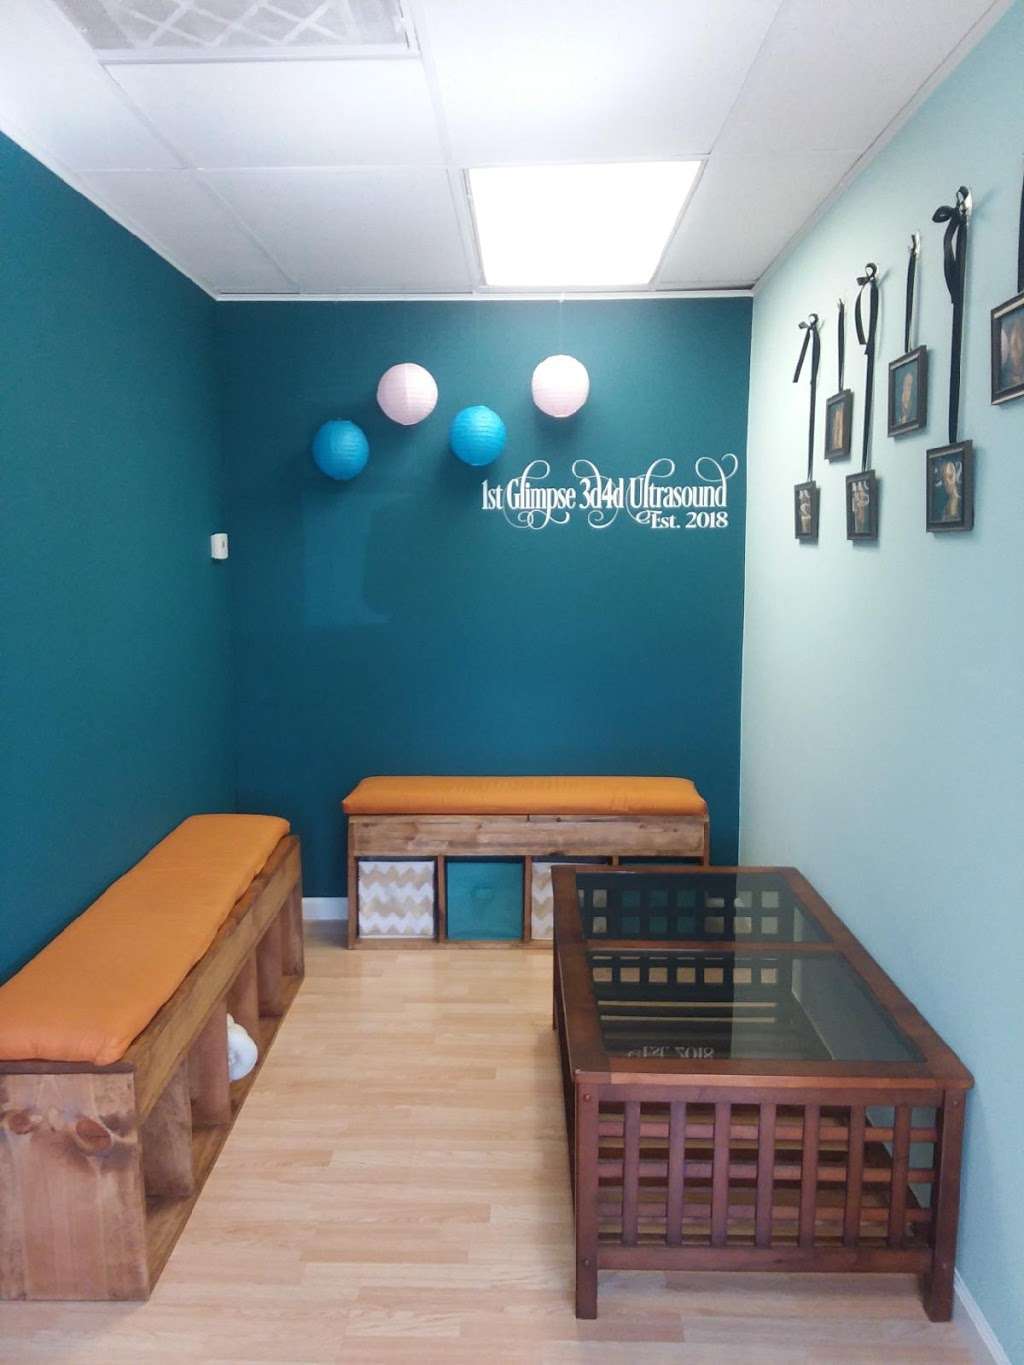 1st Glimpse 3d/4d Ultrasound, LLC | 4004 N Campbell St #6, Valparaiso, IN 46385 | Phone: (219) 315-1315